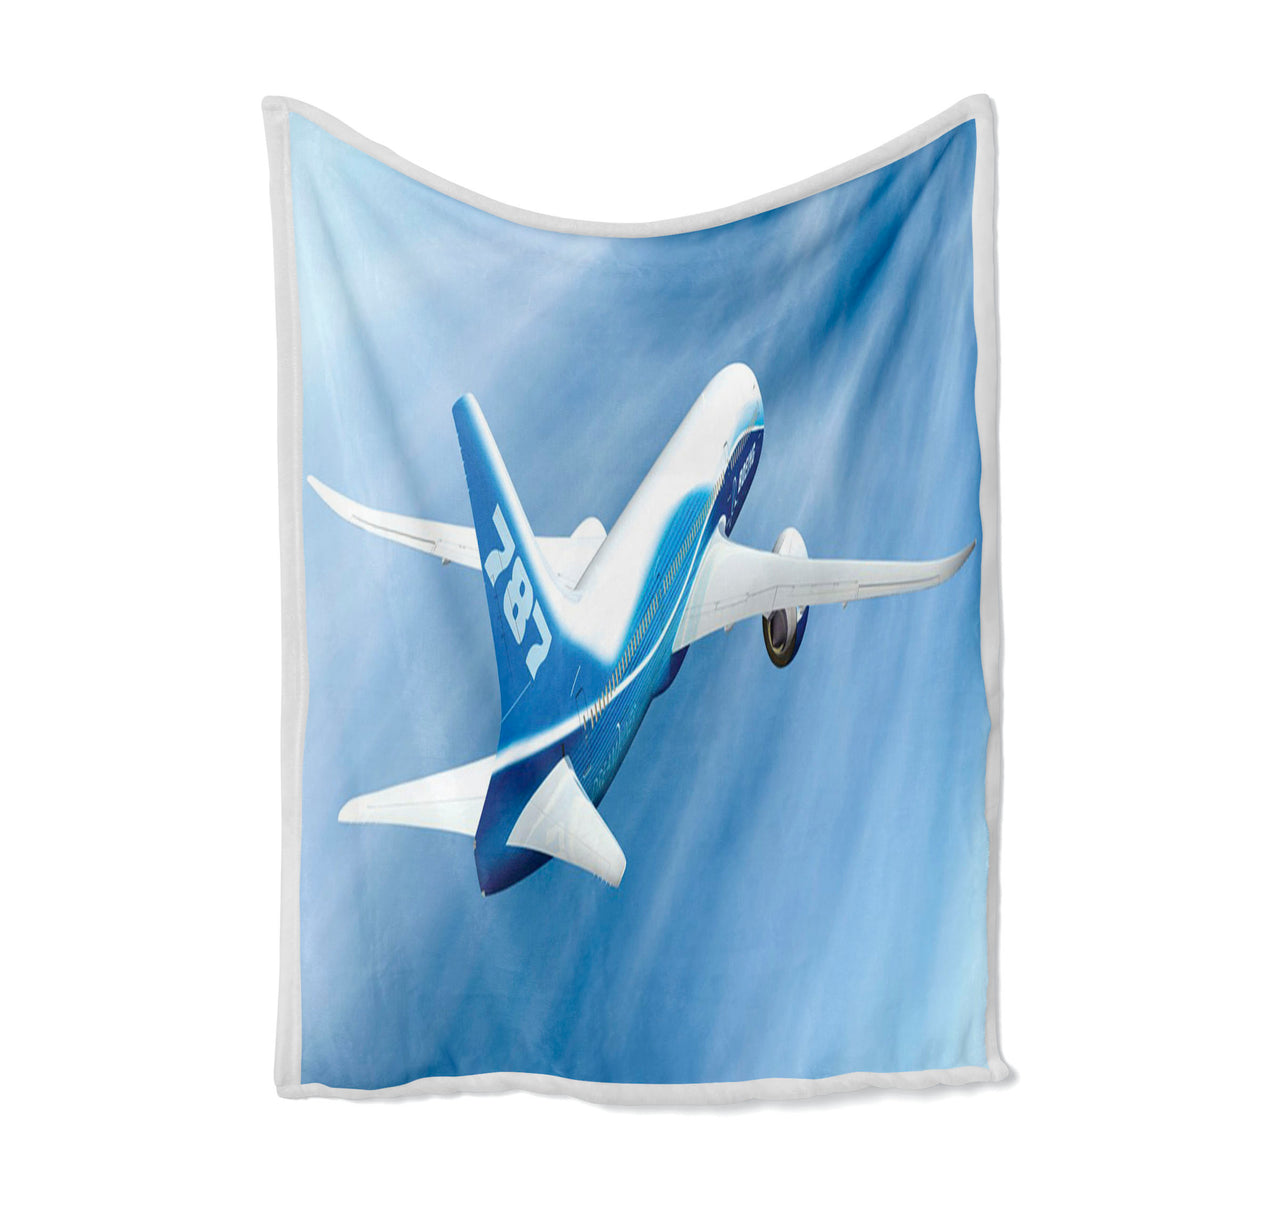 Beautiful Painting of Boeing 787 Dreamliner Designed Bed Blankets & Covers